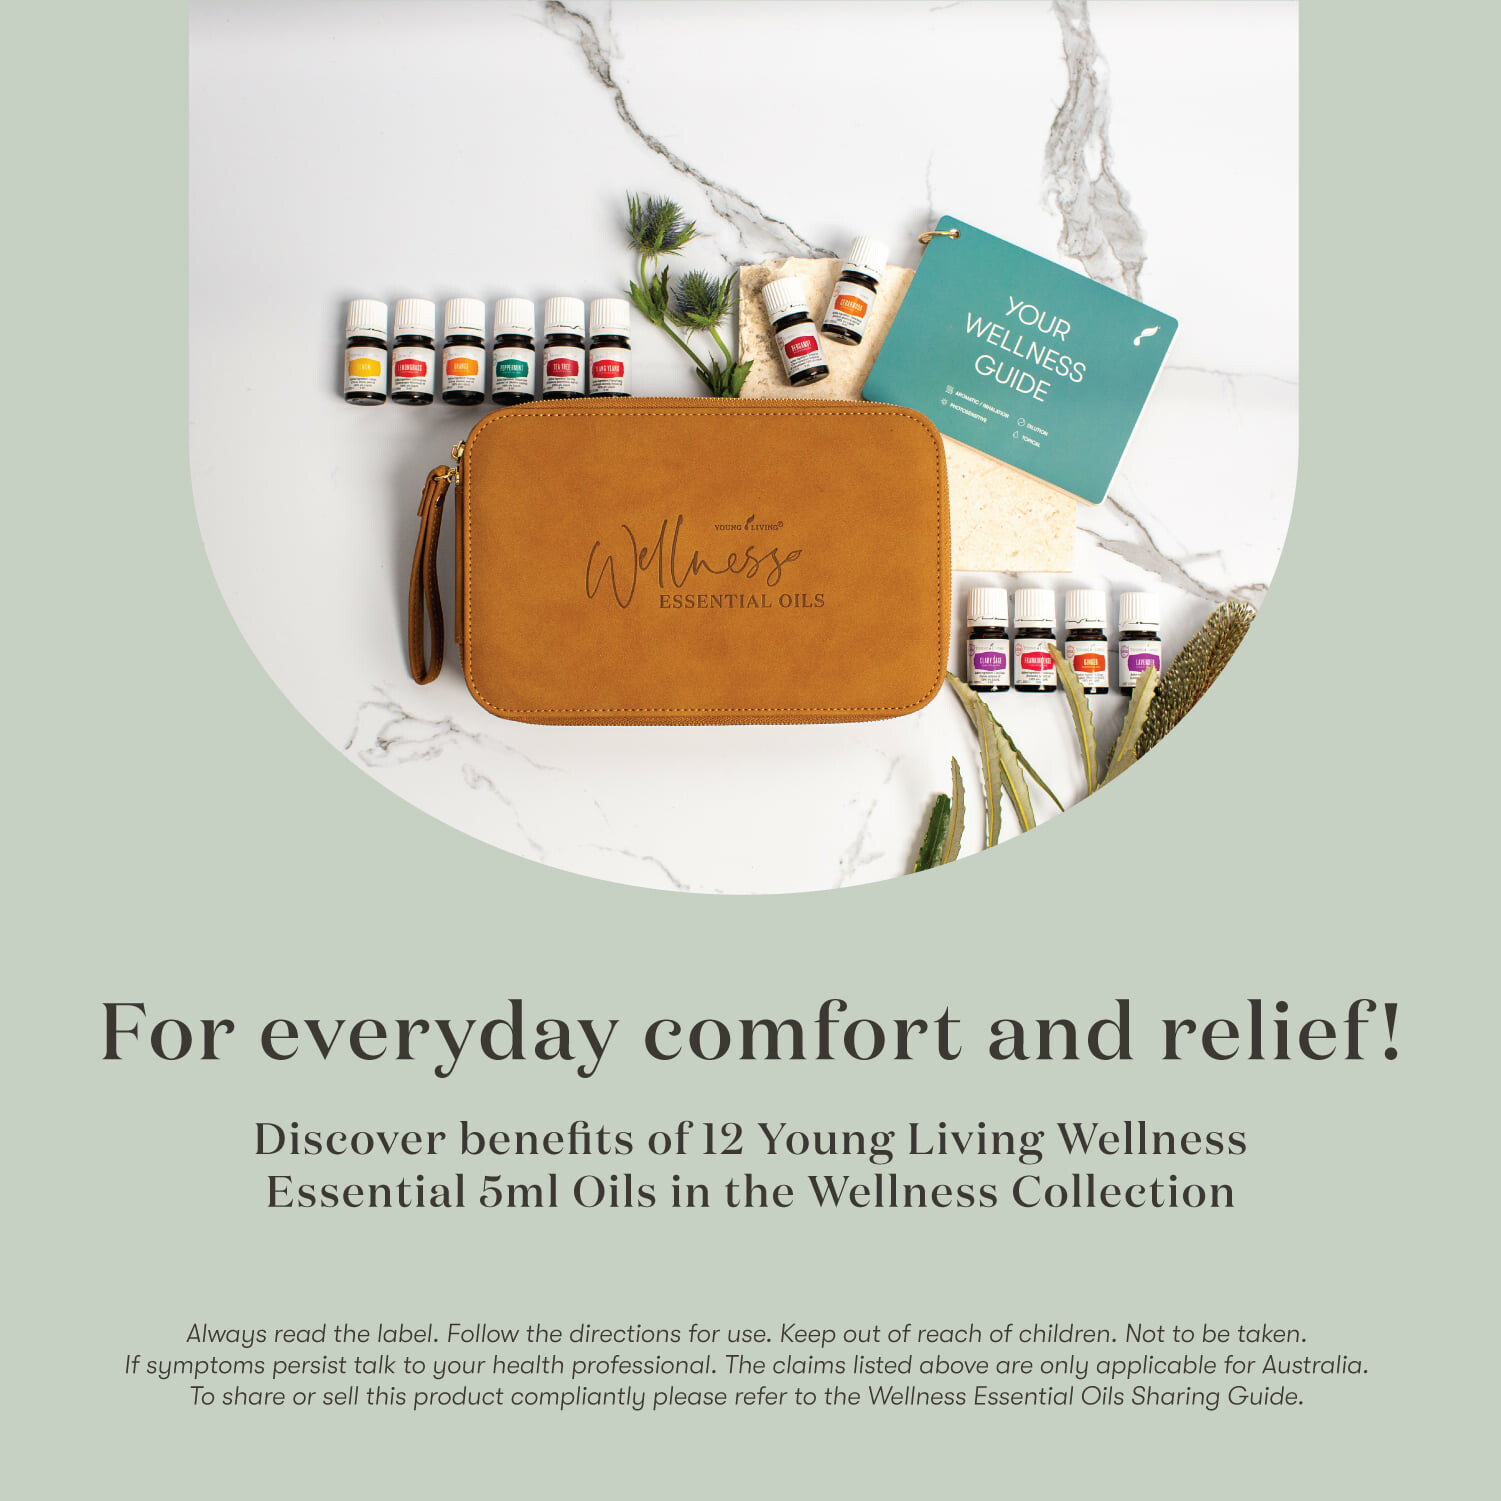 The 13 New Young Living Wellness Essential Oils